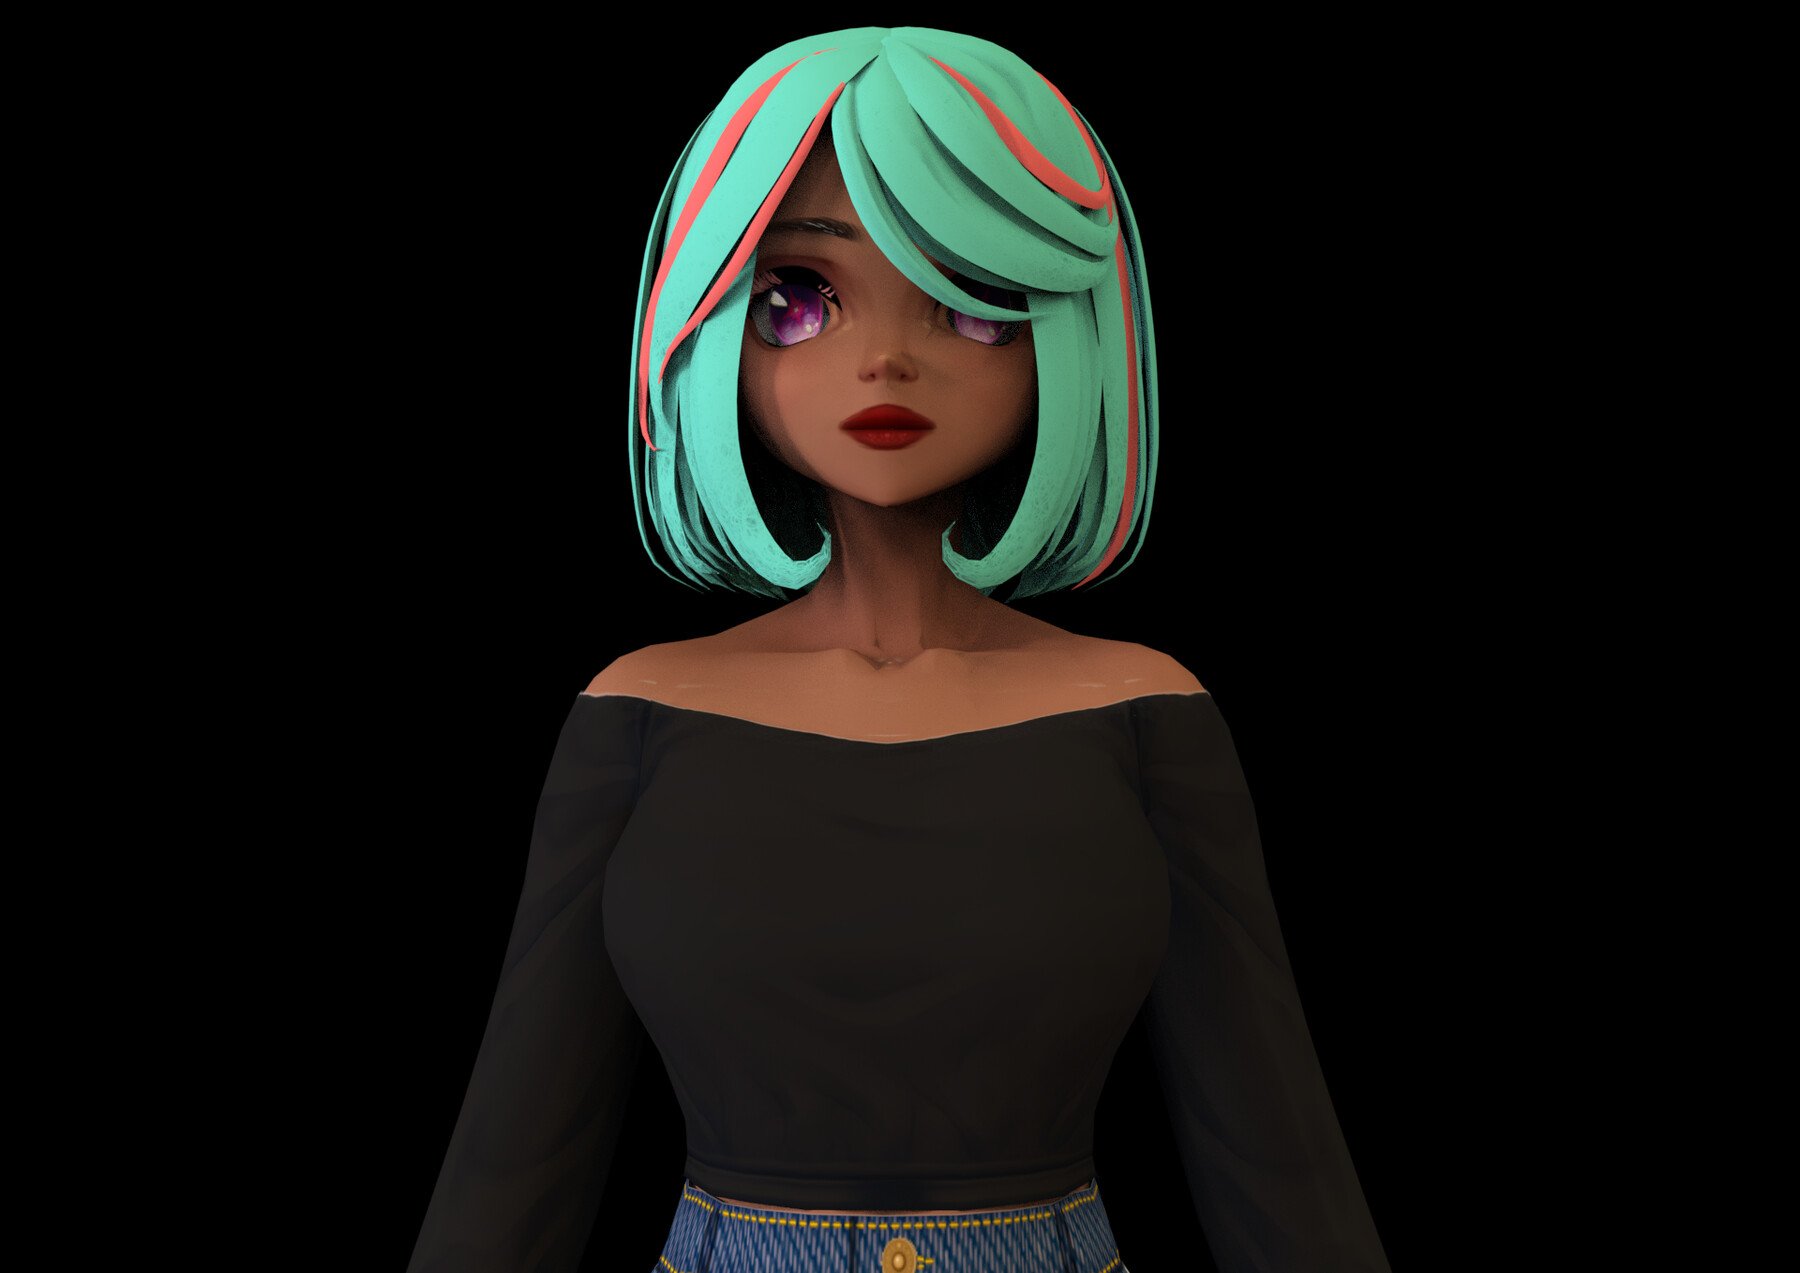 Anime Character Girl M4 - 3D Model by CGAnime